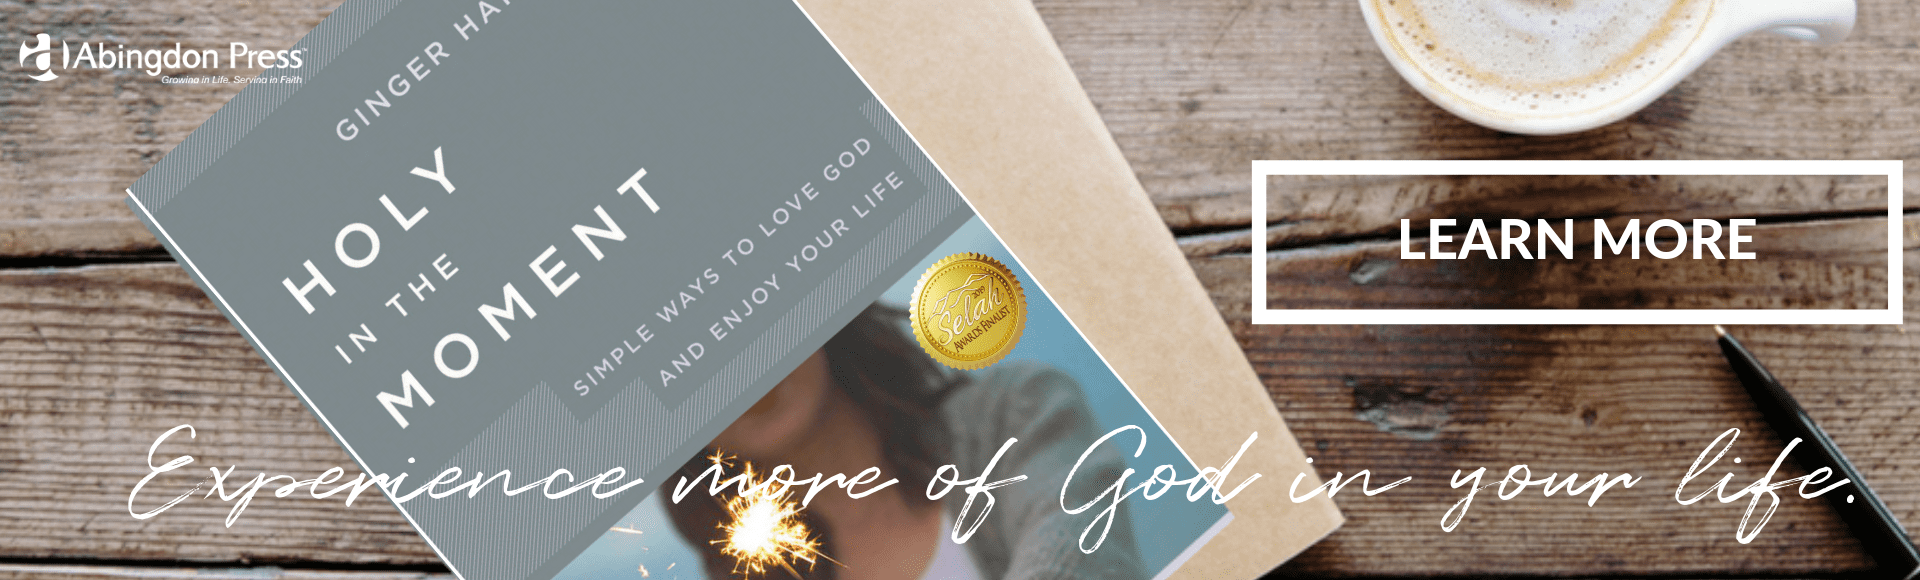 Check out the award-winning book, Holy in the Moment. Join Ginger Harrington for an encouraging look at making the most of daily choices to to trust God in the moment. Overcome anxiety, perfectionism, insecurity, and other flesh traits that hold us back. Find freedom in Christ one moment at a time!